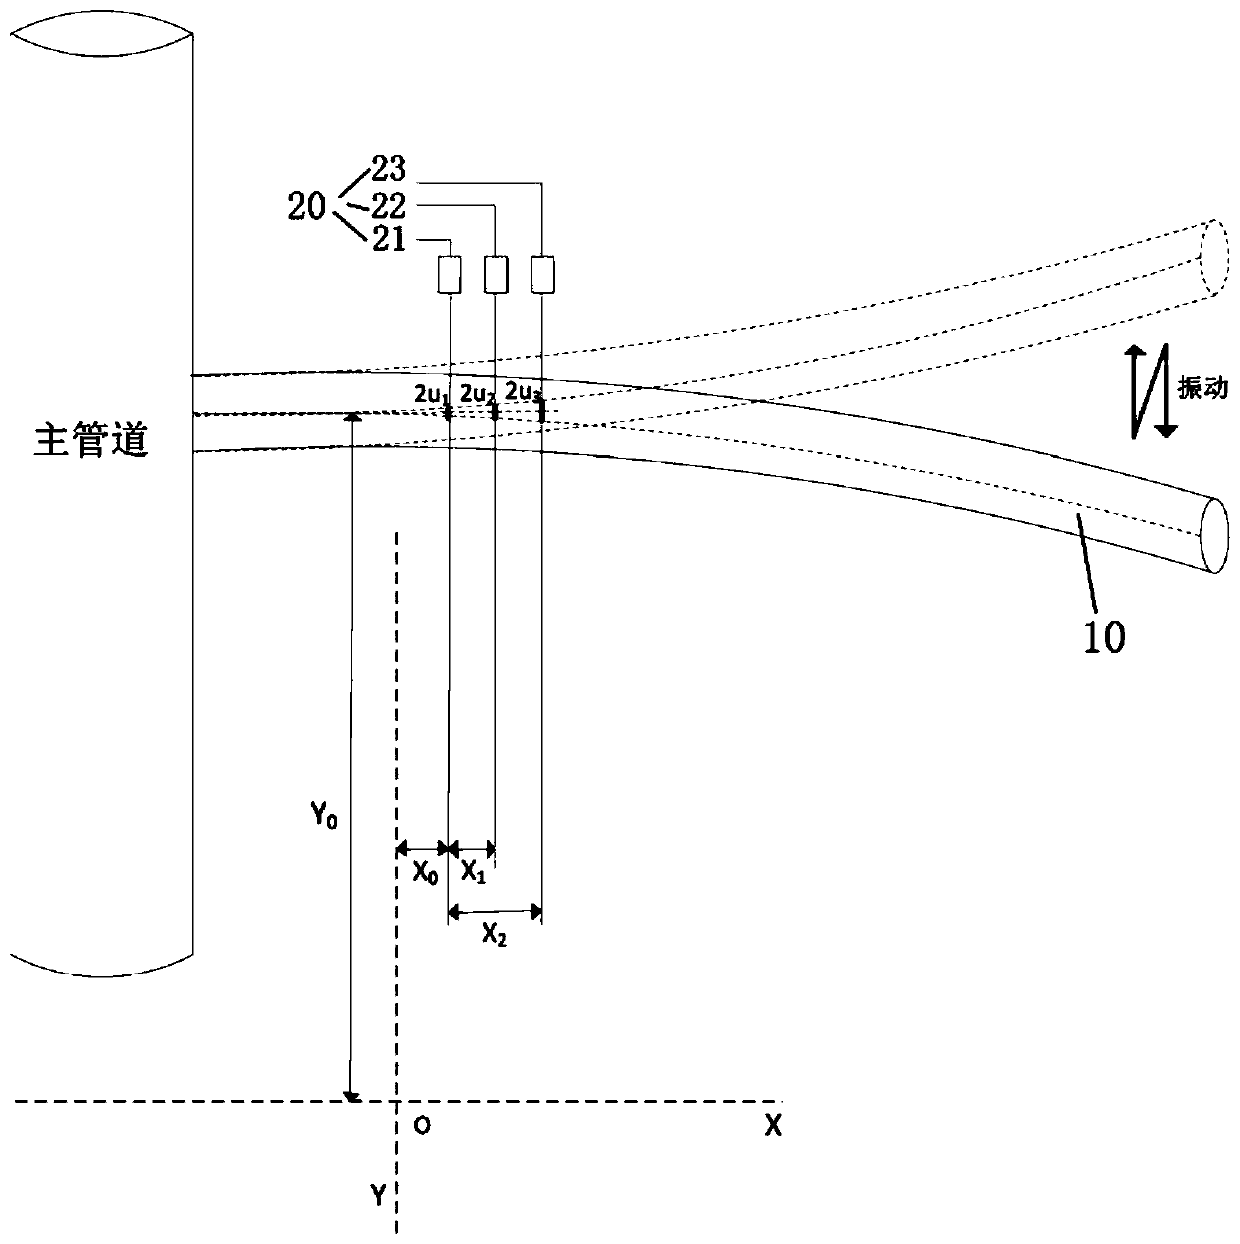 Small pipe vibration stress measurement and fatigue life evaluation method for nuclear power plant